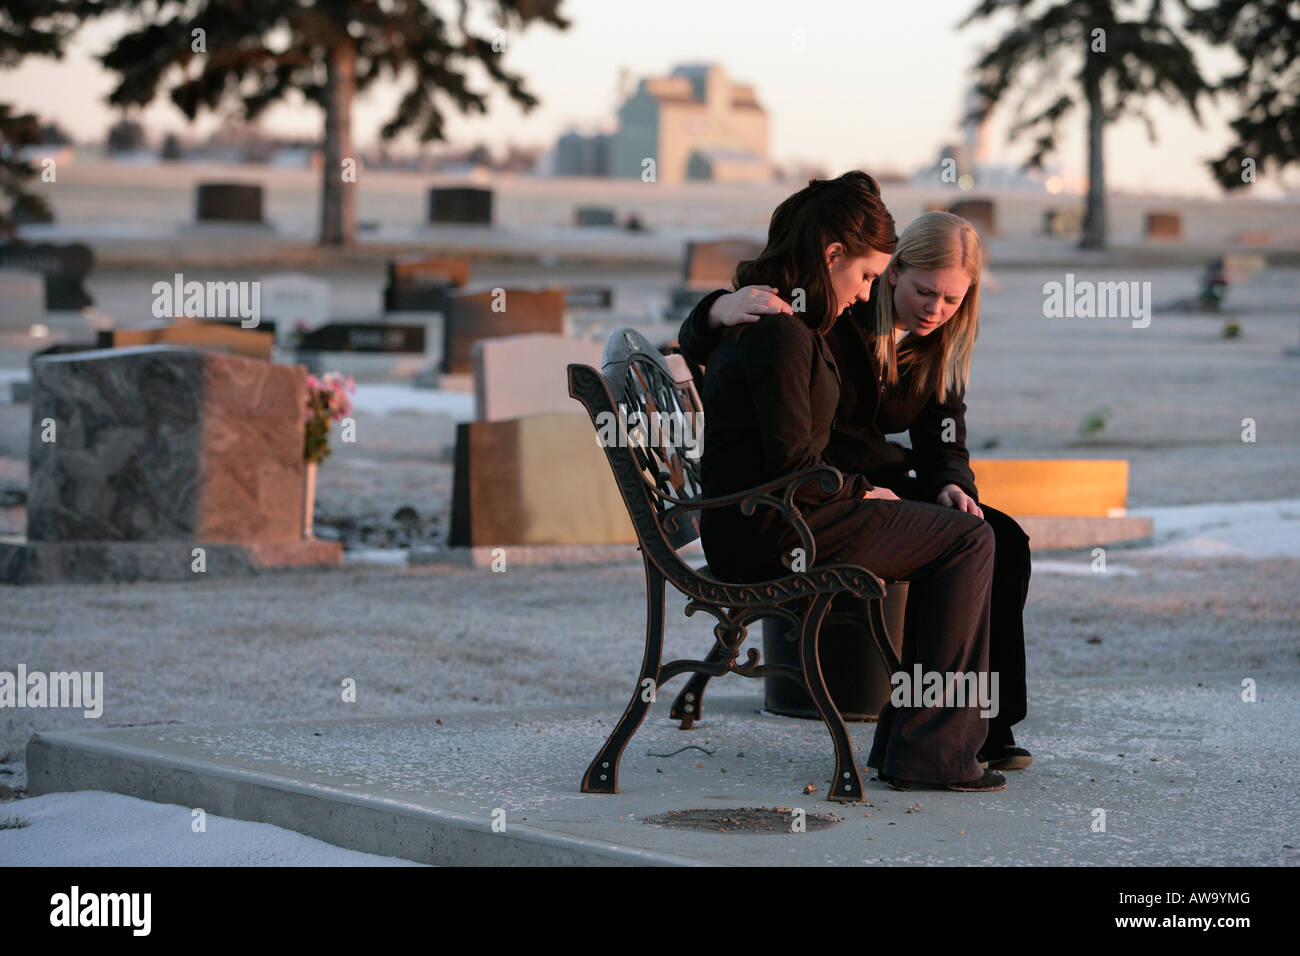 Two women praying together Stock Photo